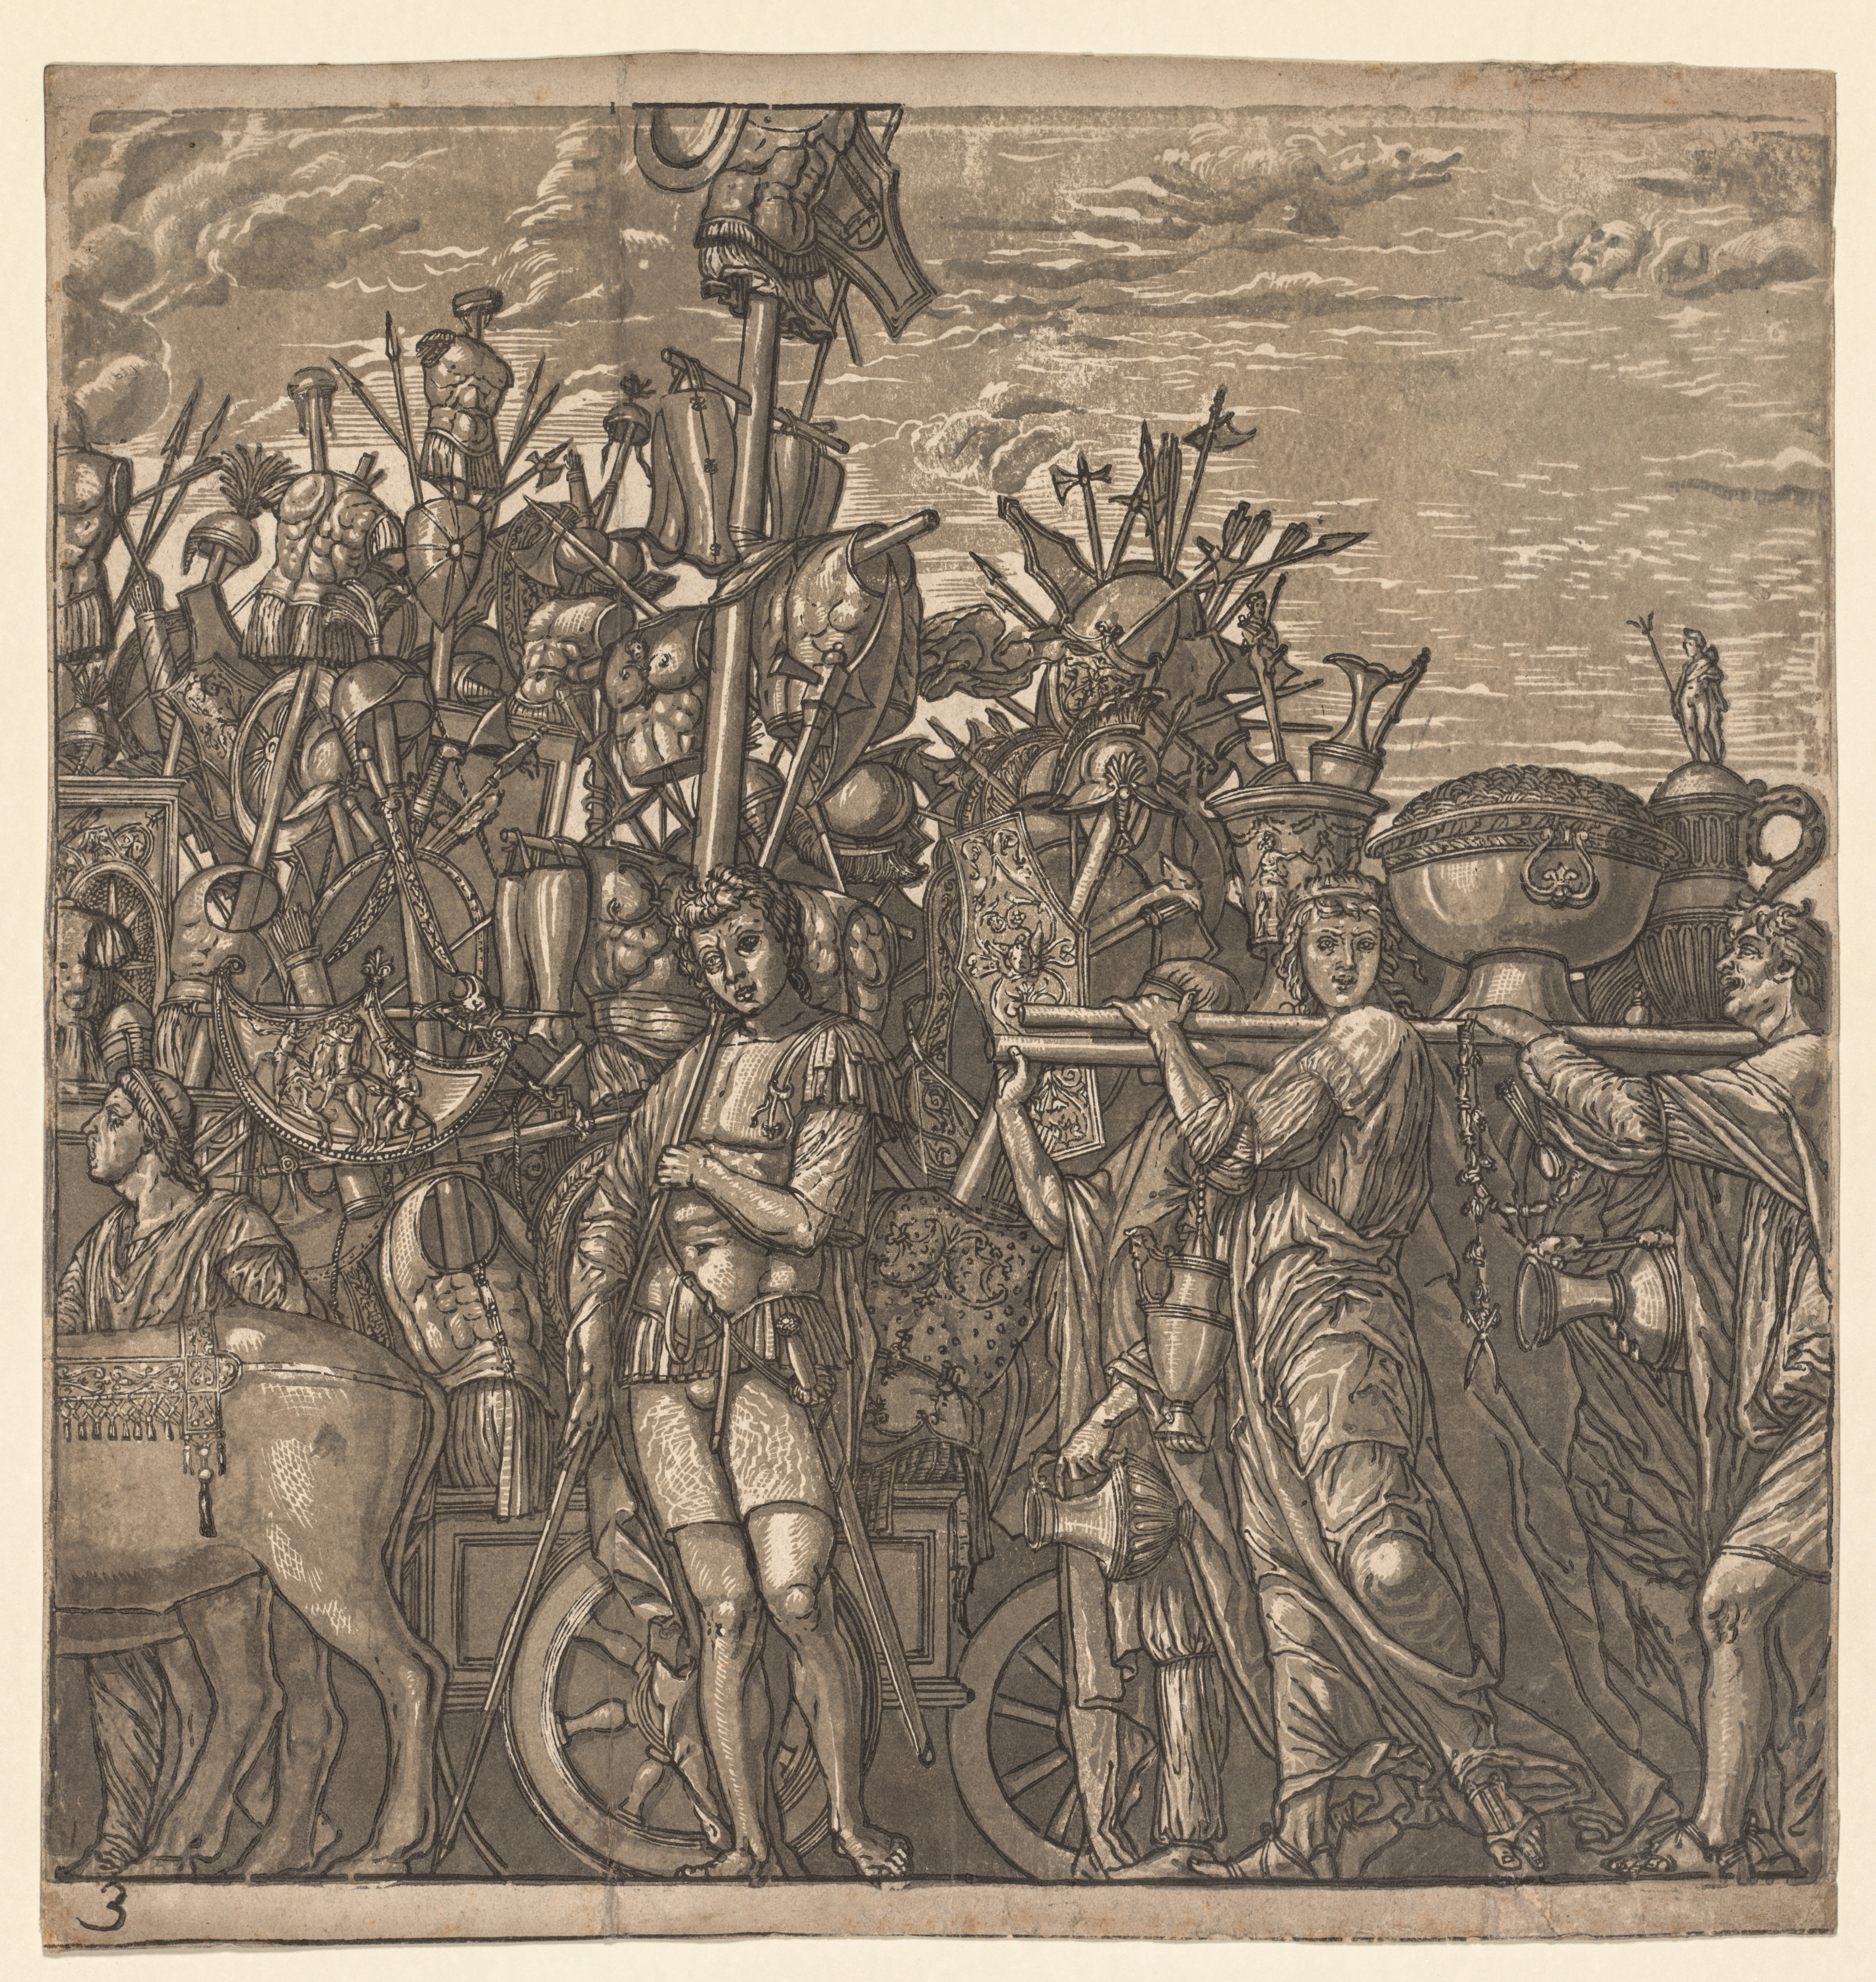 The Triumph of Julius Caesar:  Soldiers Marching with Trophies of War